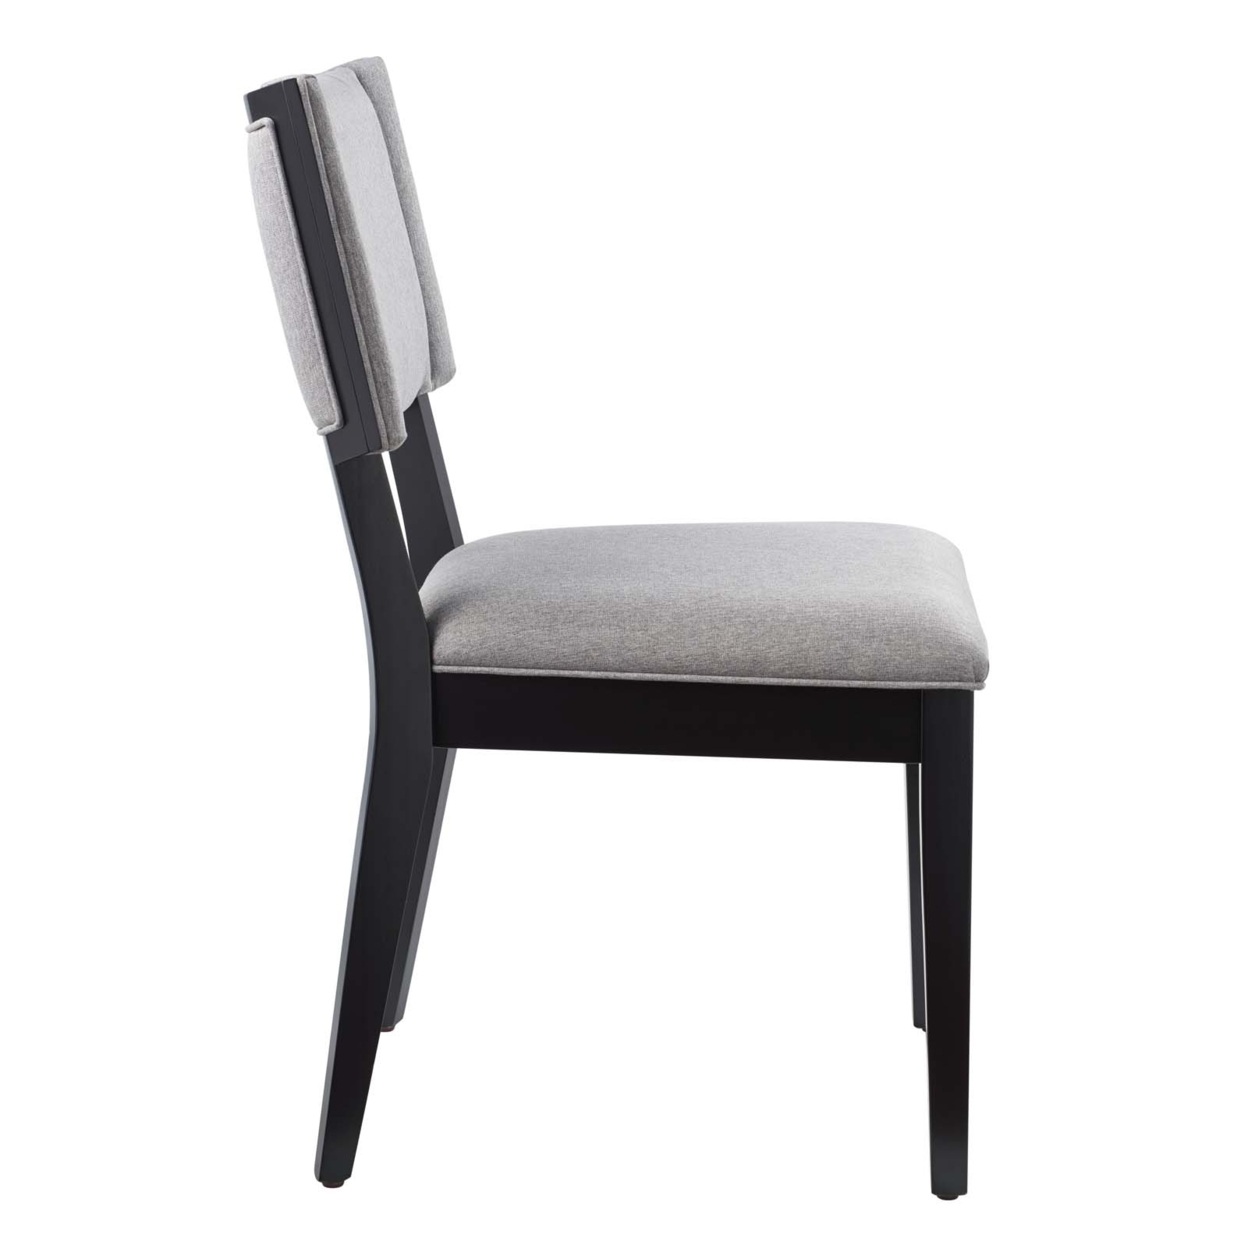 Esquire Dining Chairs - Set Of 2, Light Gray